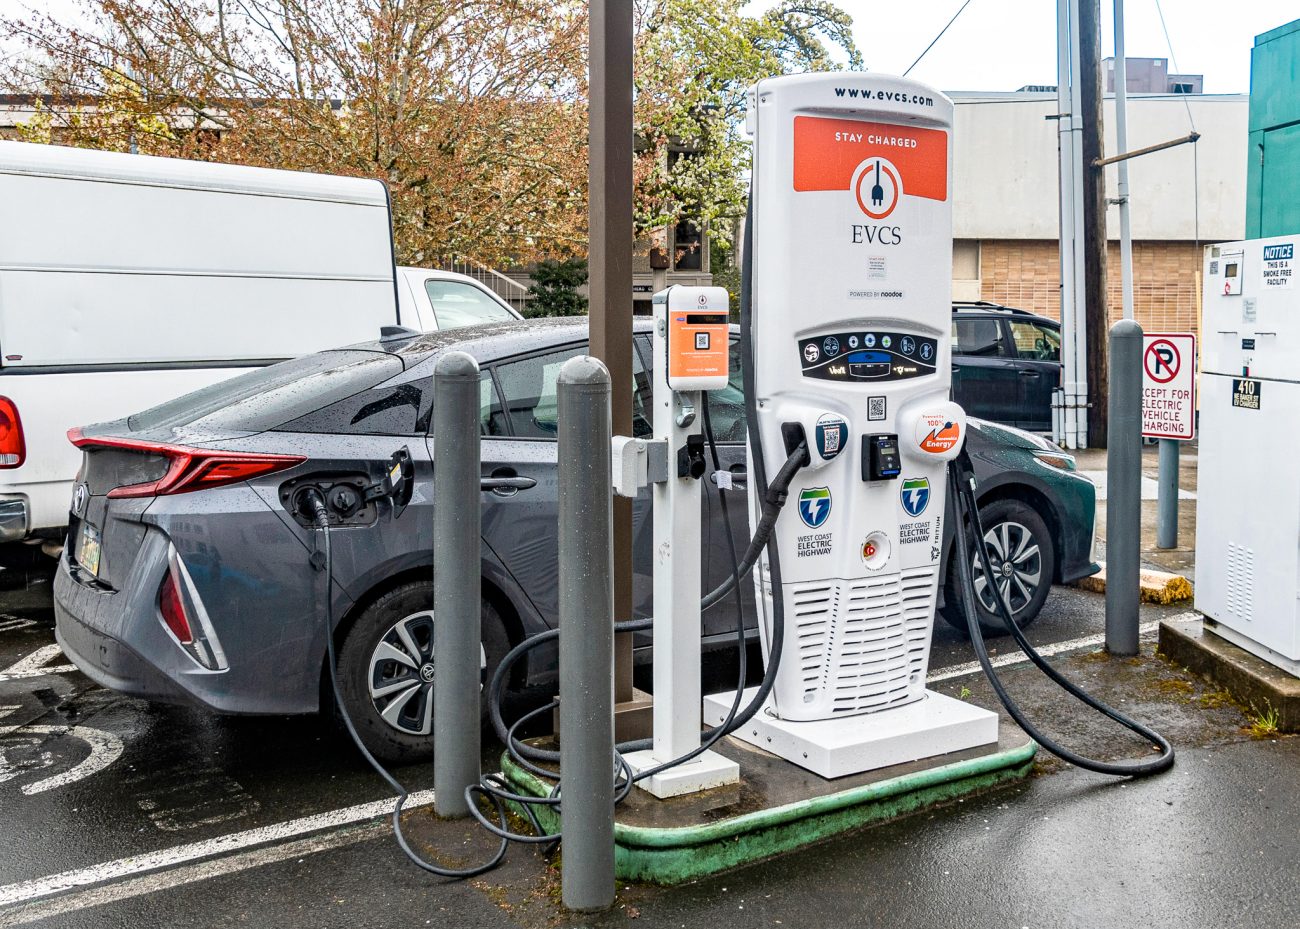 Electrify America to double number of EV chargers as wave of electric  vehicles come to market